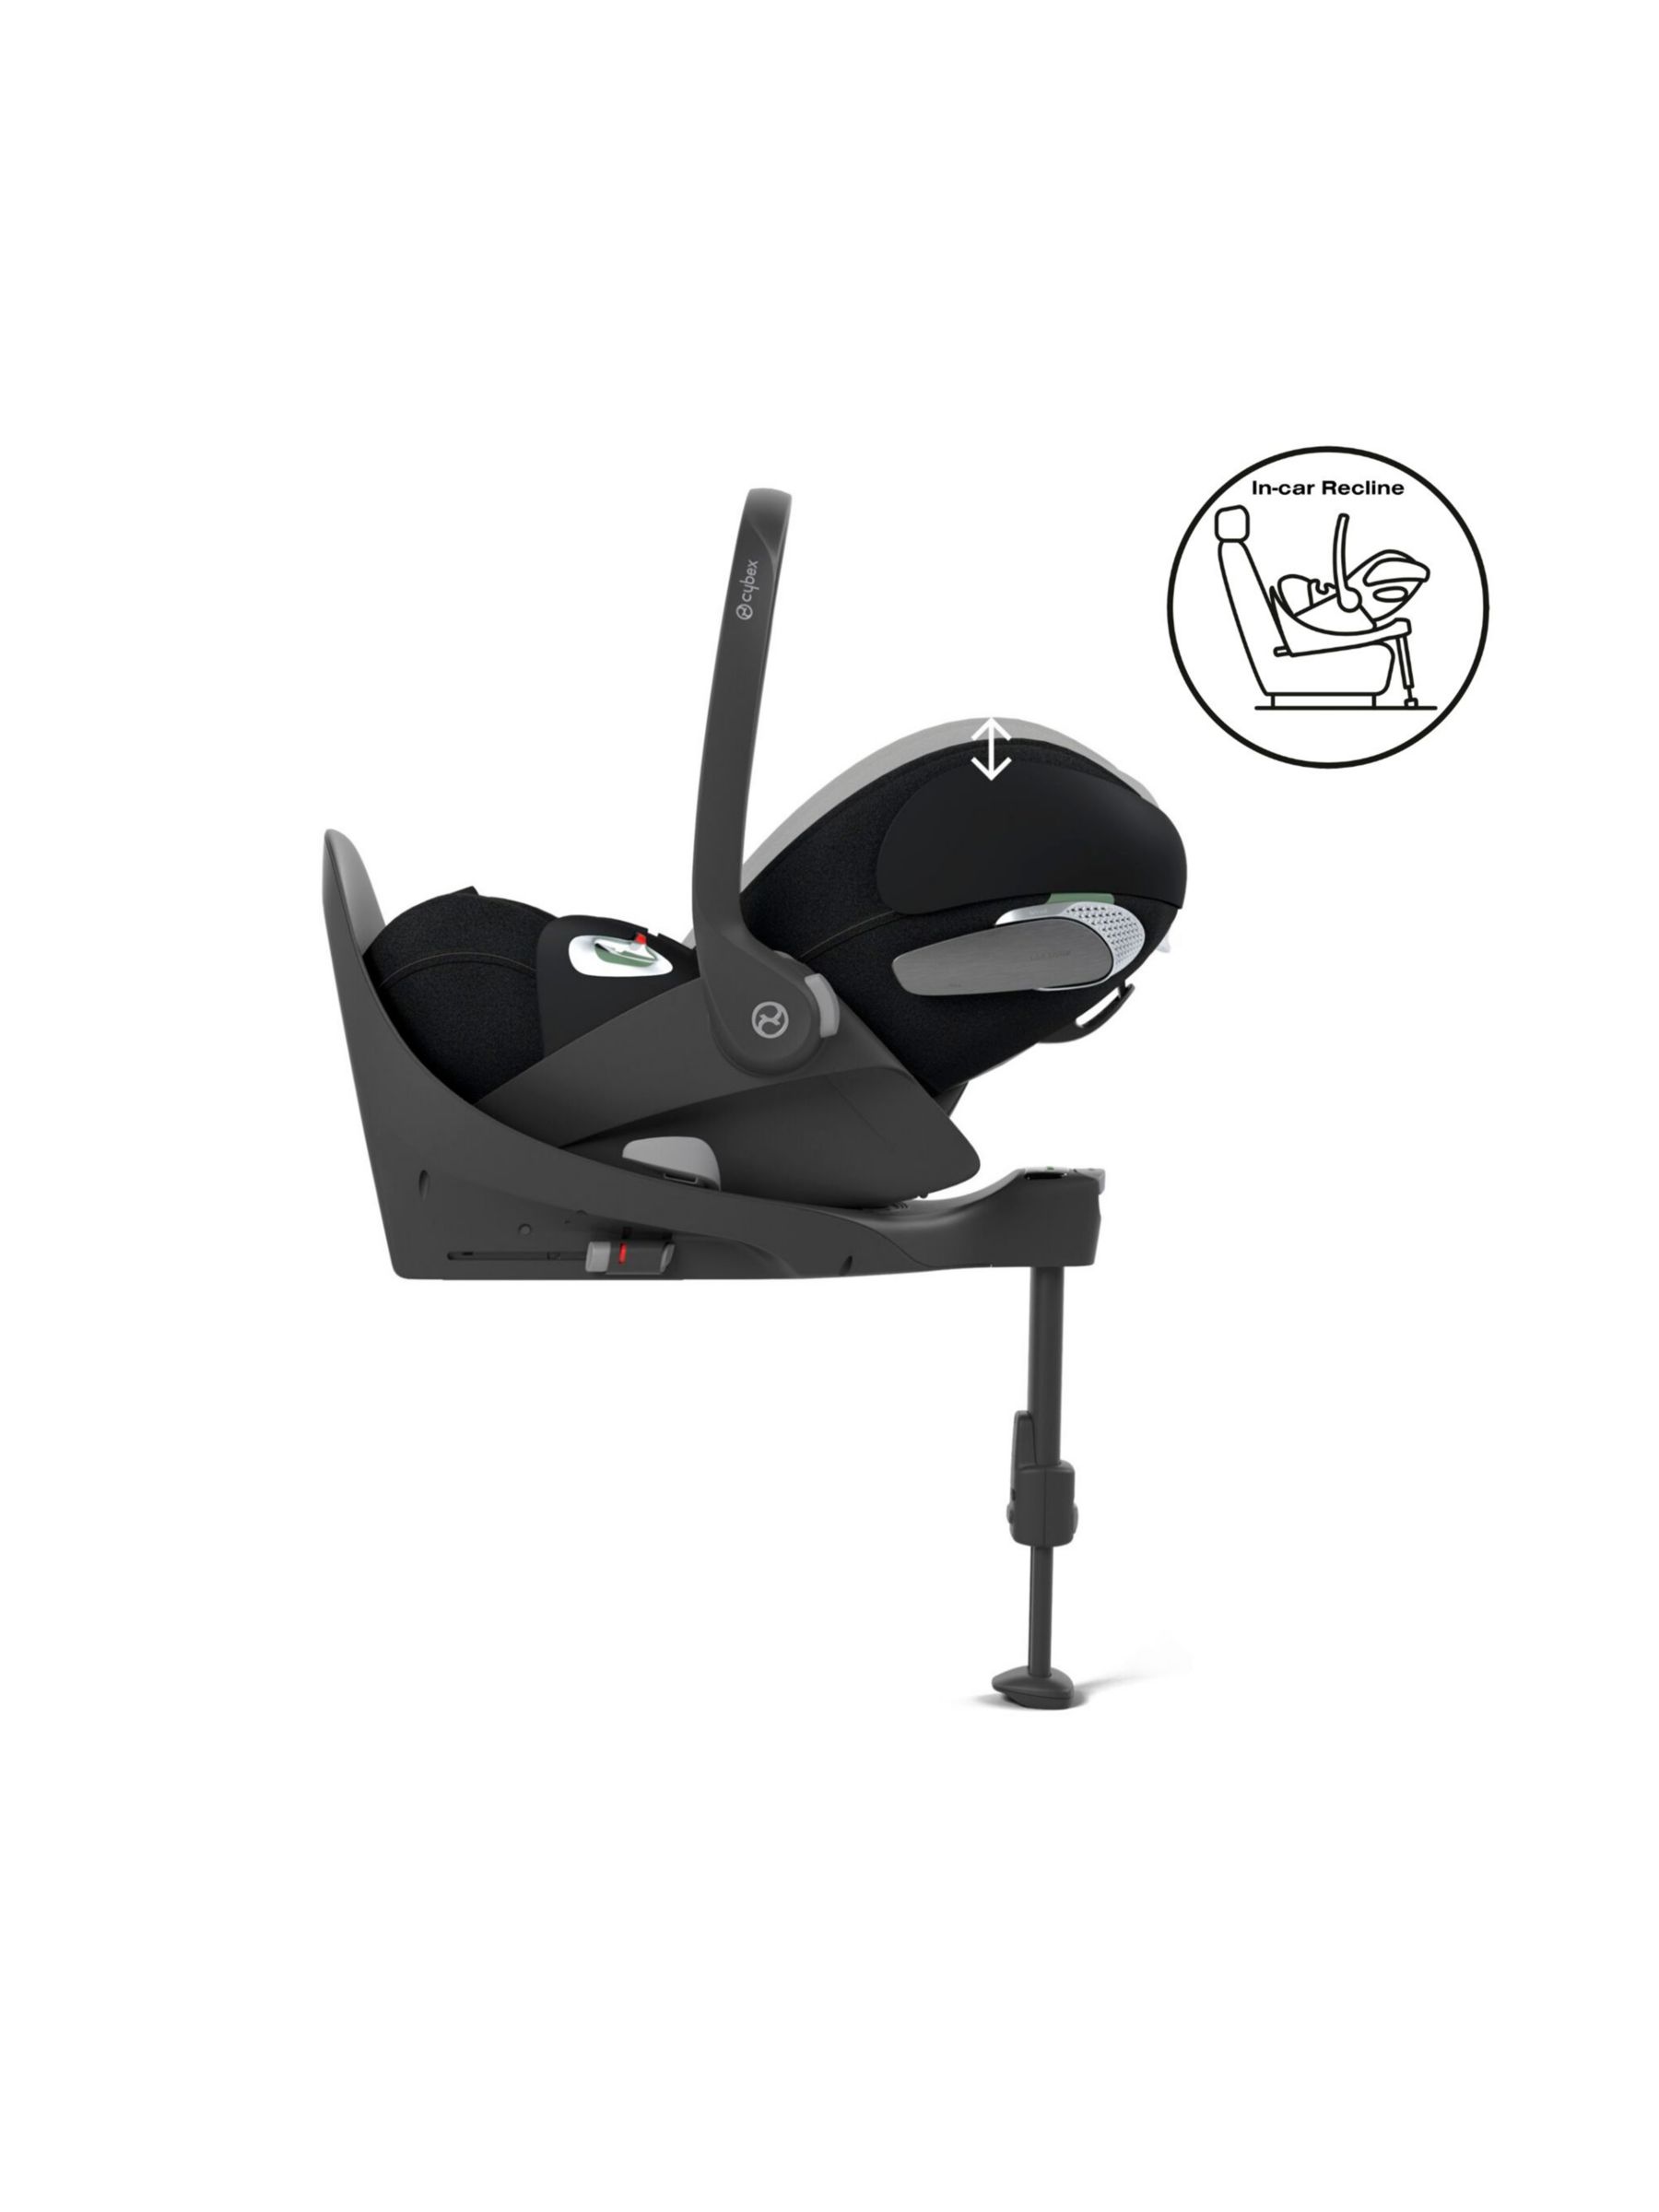 Cybex COYA Compact Pushchair & Cloud T i-Size Car Seat with Adaptors Bundle, Rose Gold/ Sepia Black